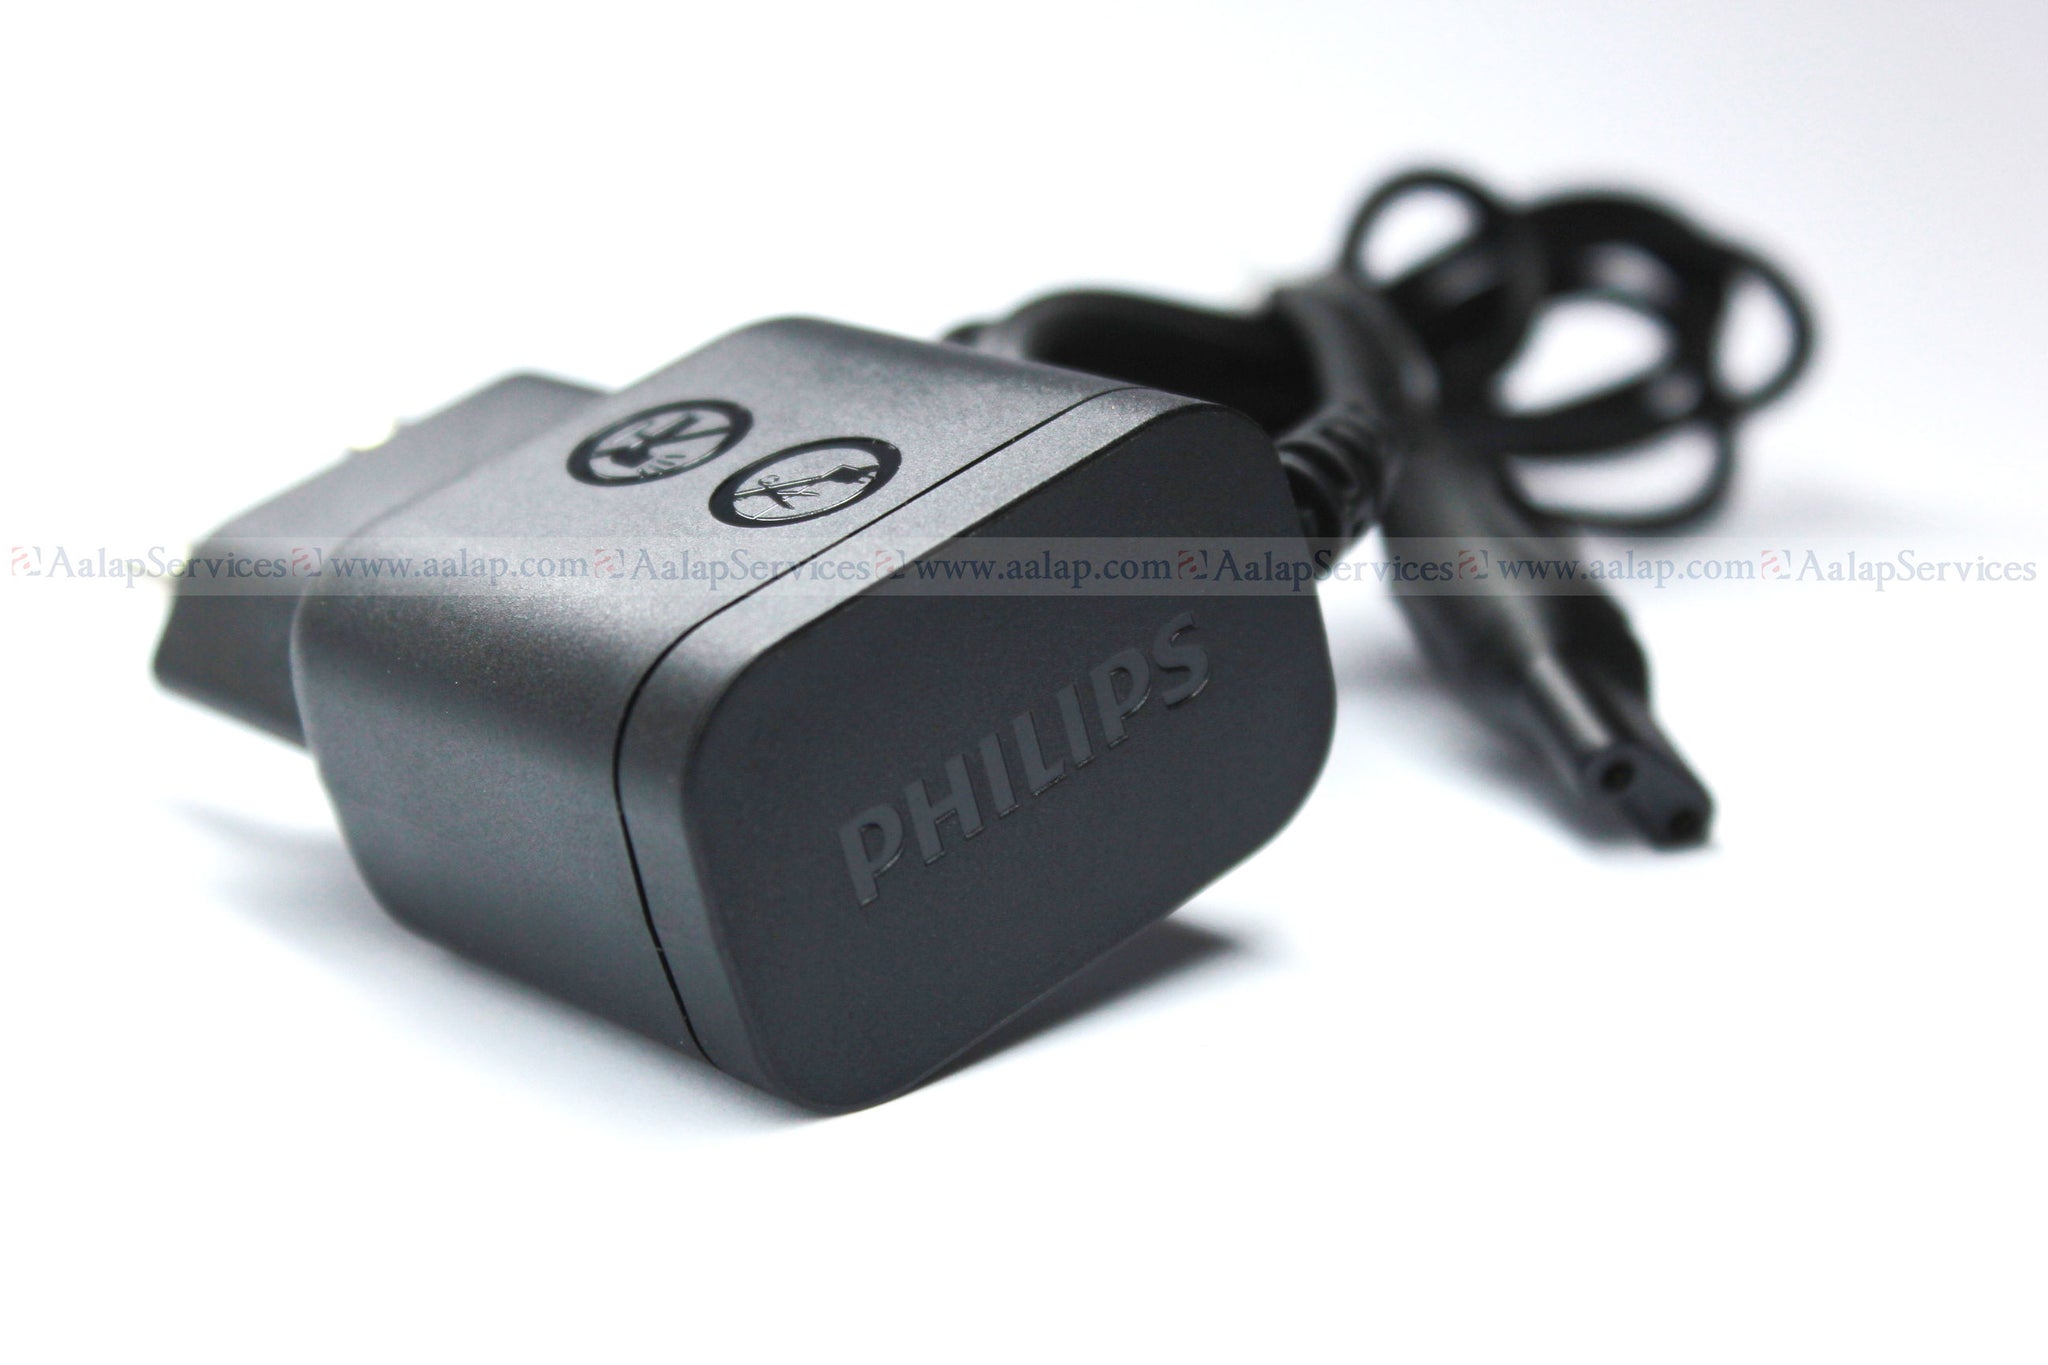 philips trimmer bt3205 charger